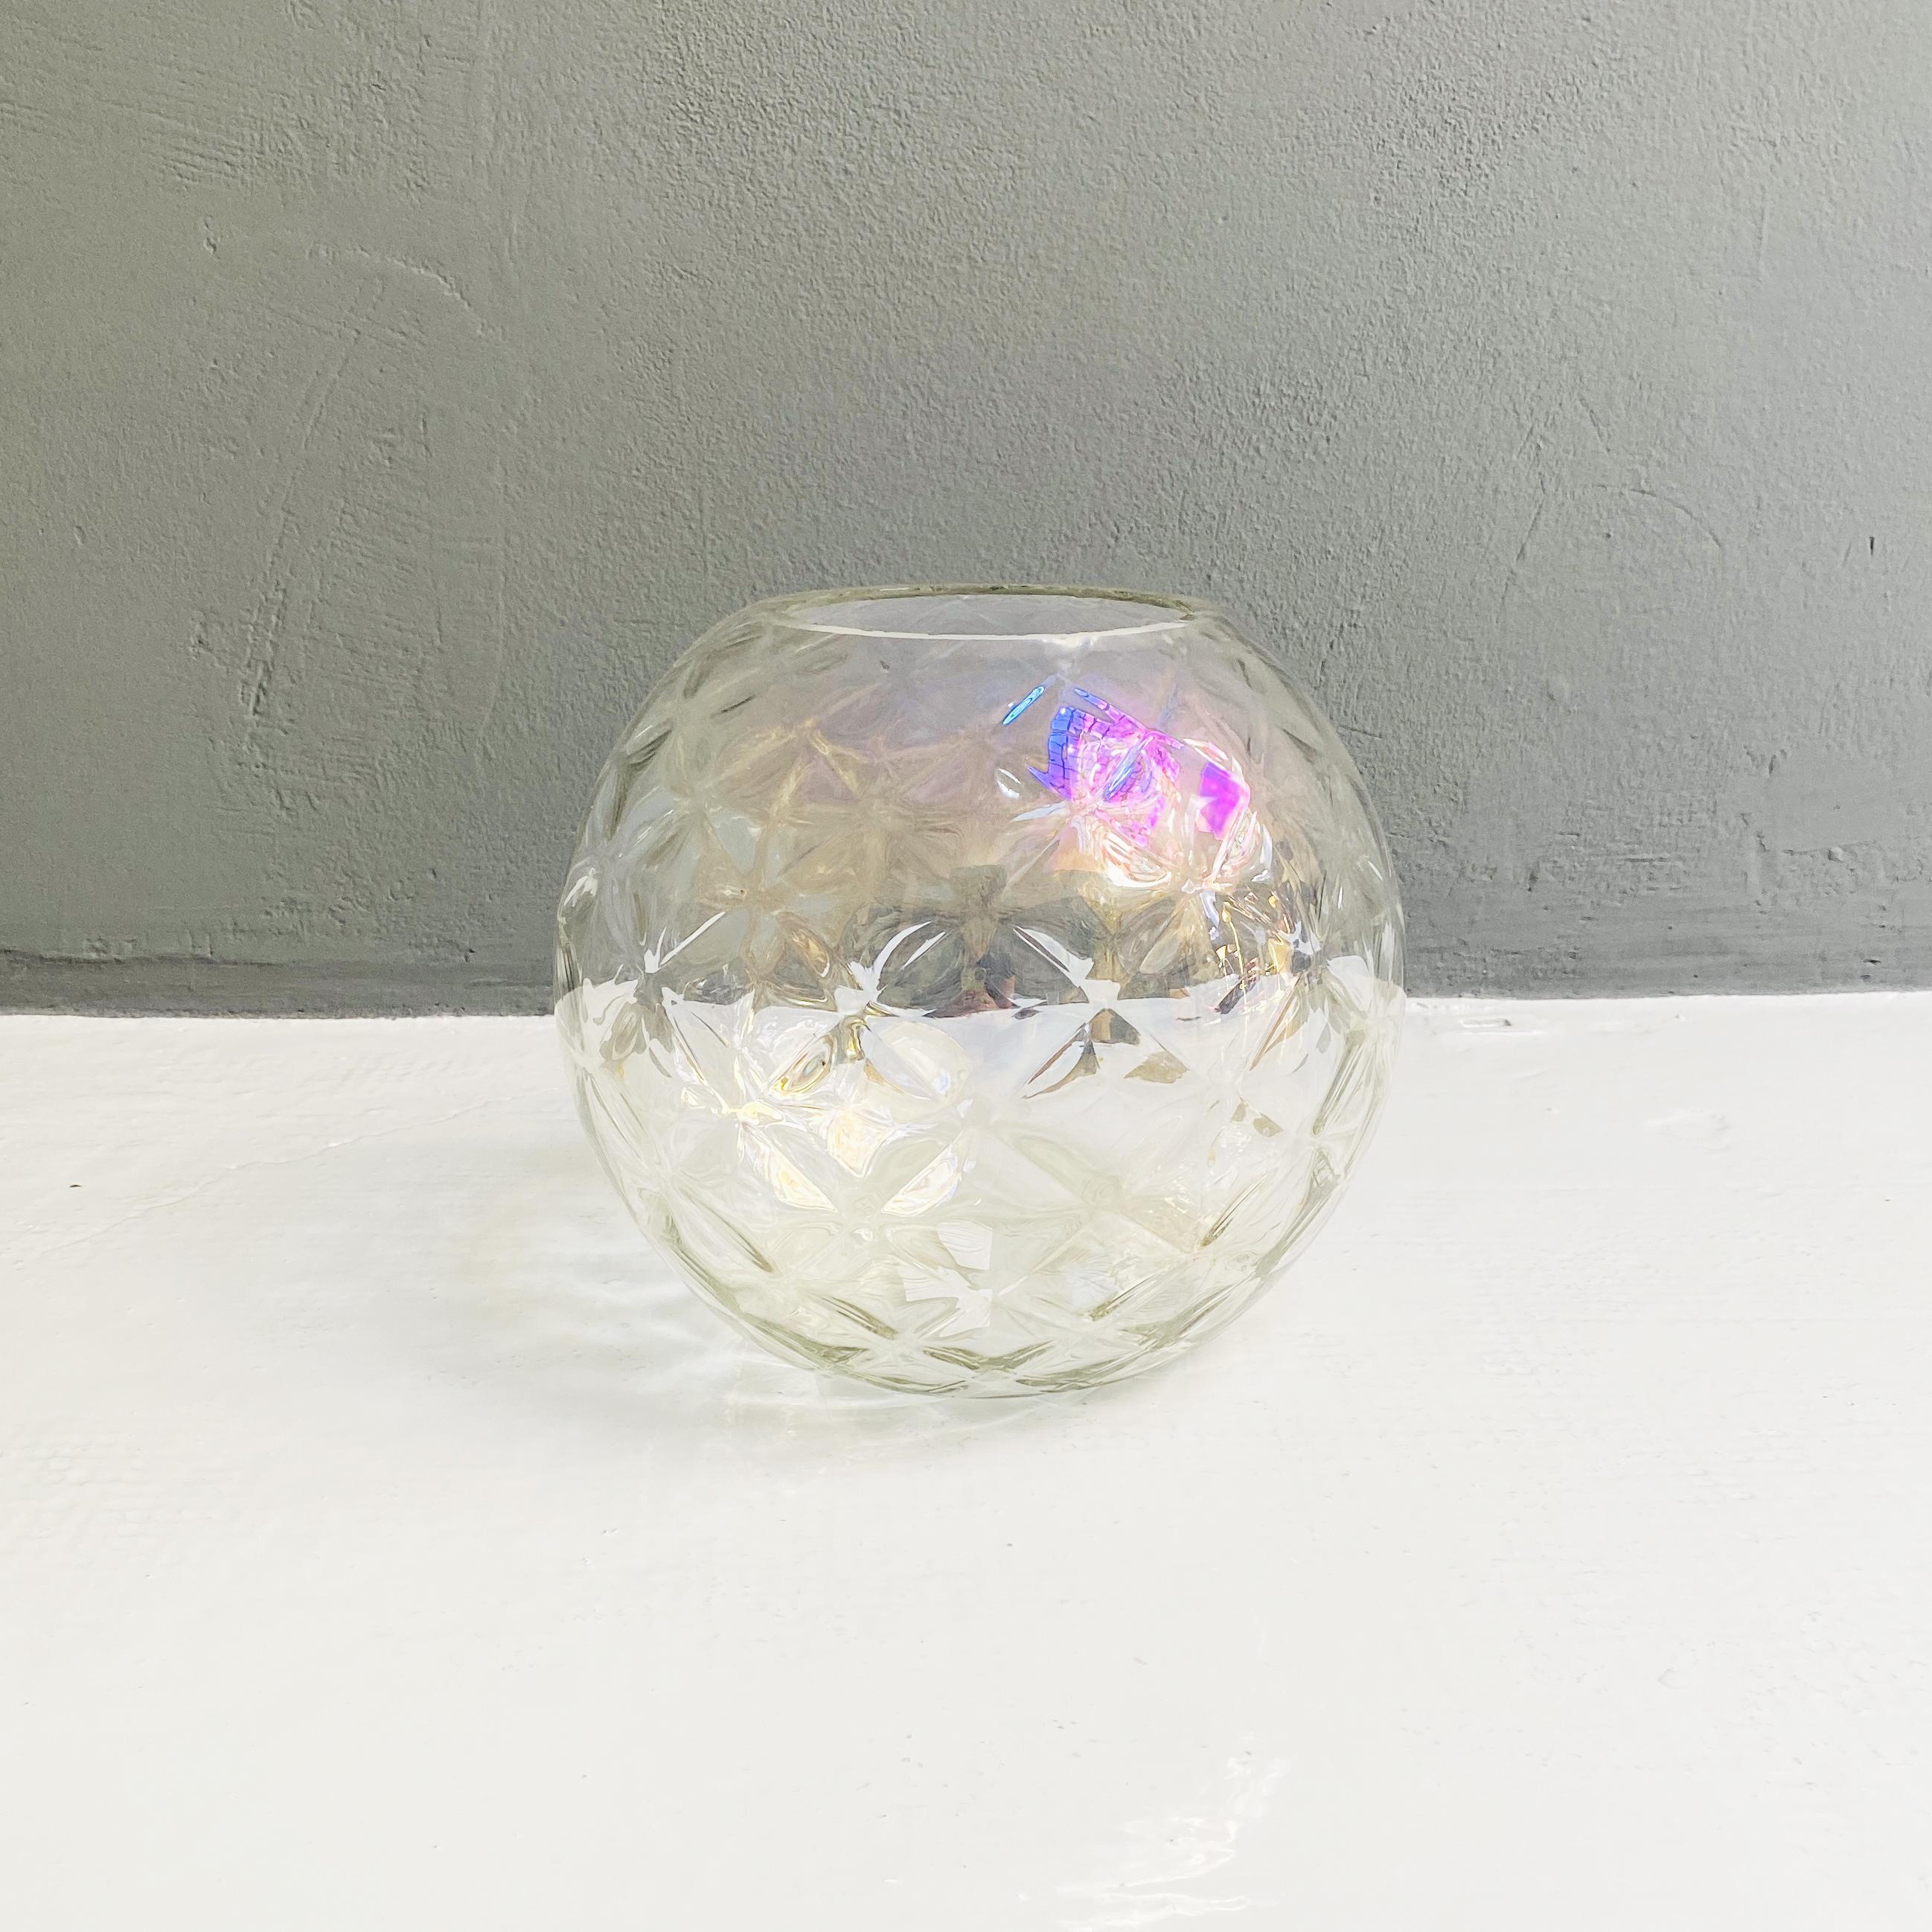 Transparent glass vase, 1980s
Spherical vase in transparent glass and printed with rhomboidal motifs. 
Edge with irregular finish.
1980s

Good condition 

Measures in cm 29 x 28 H.